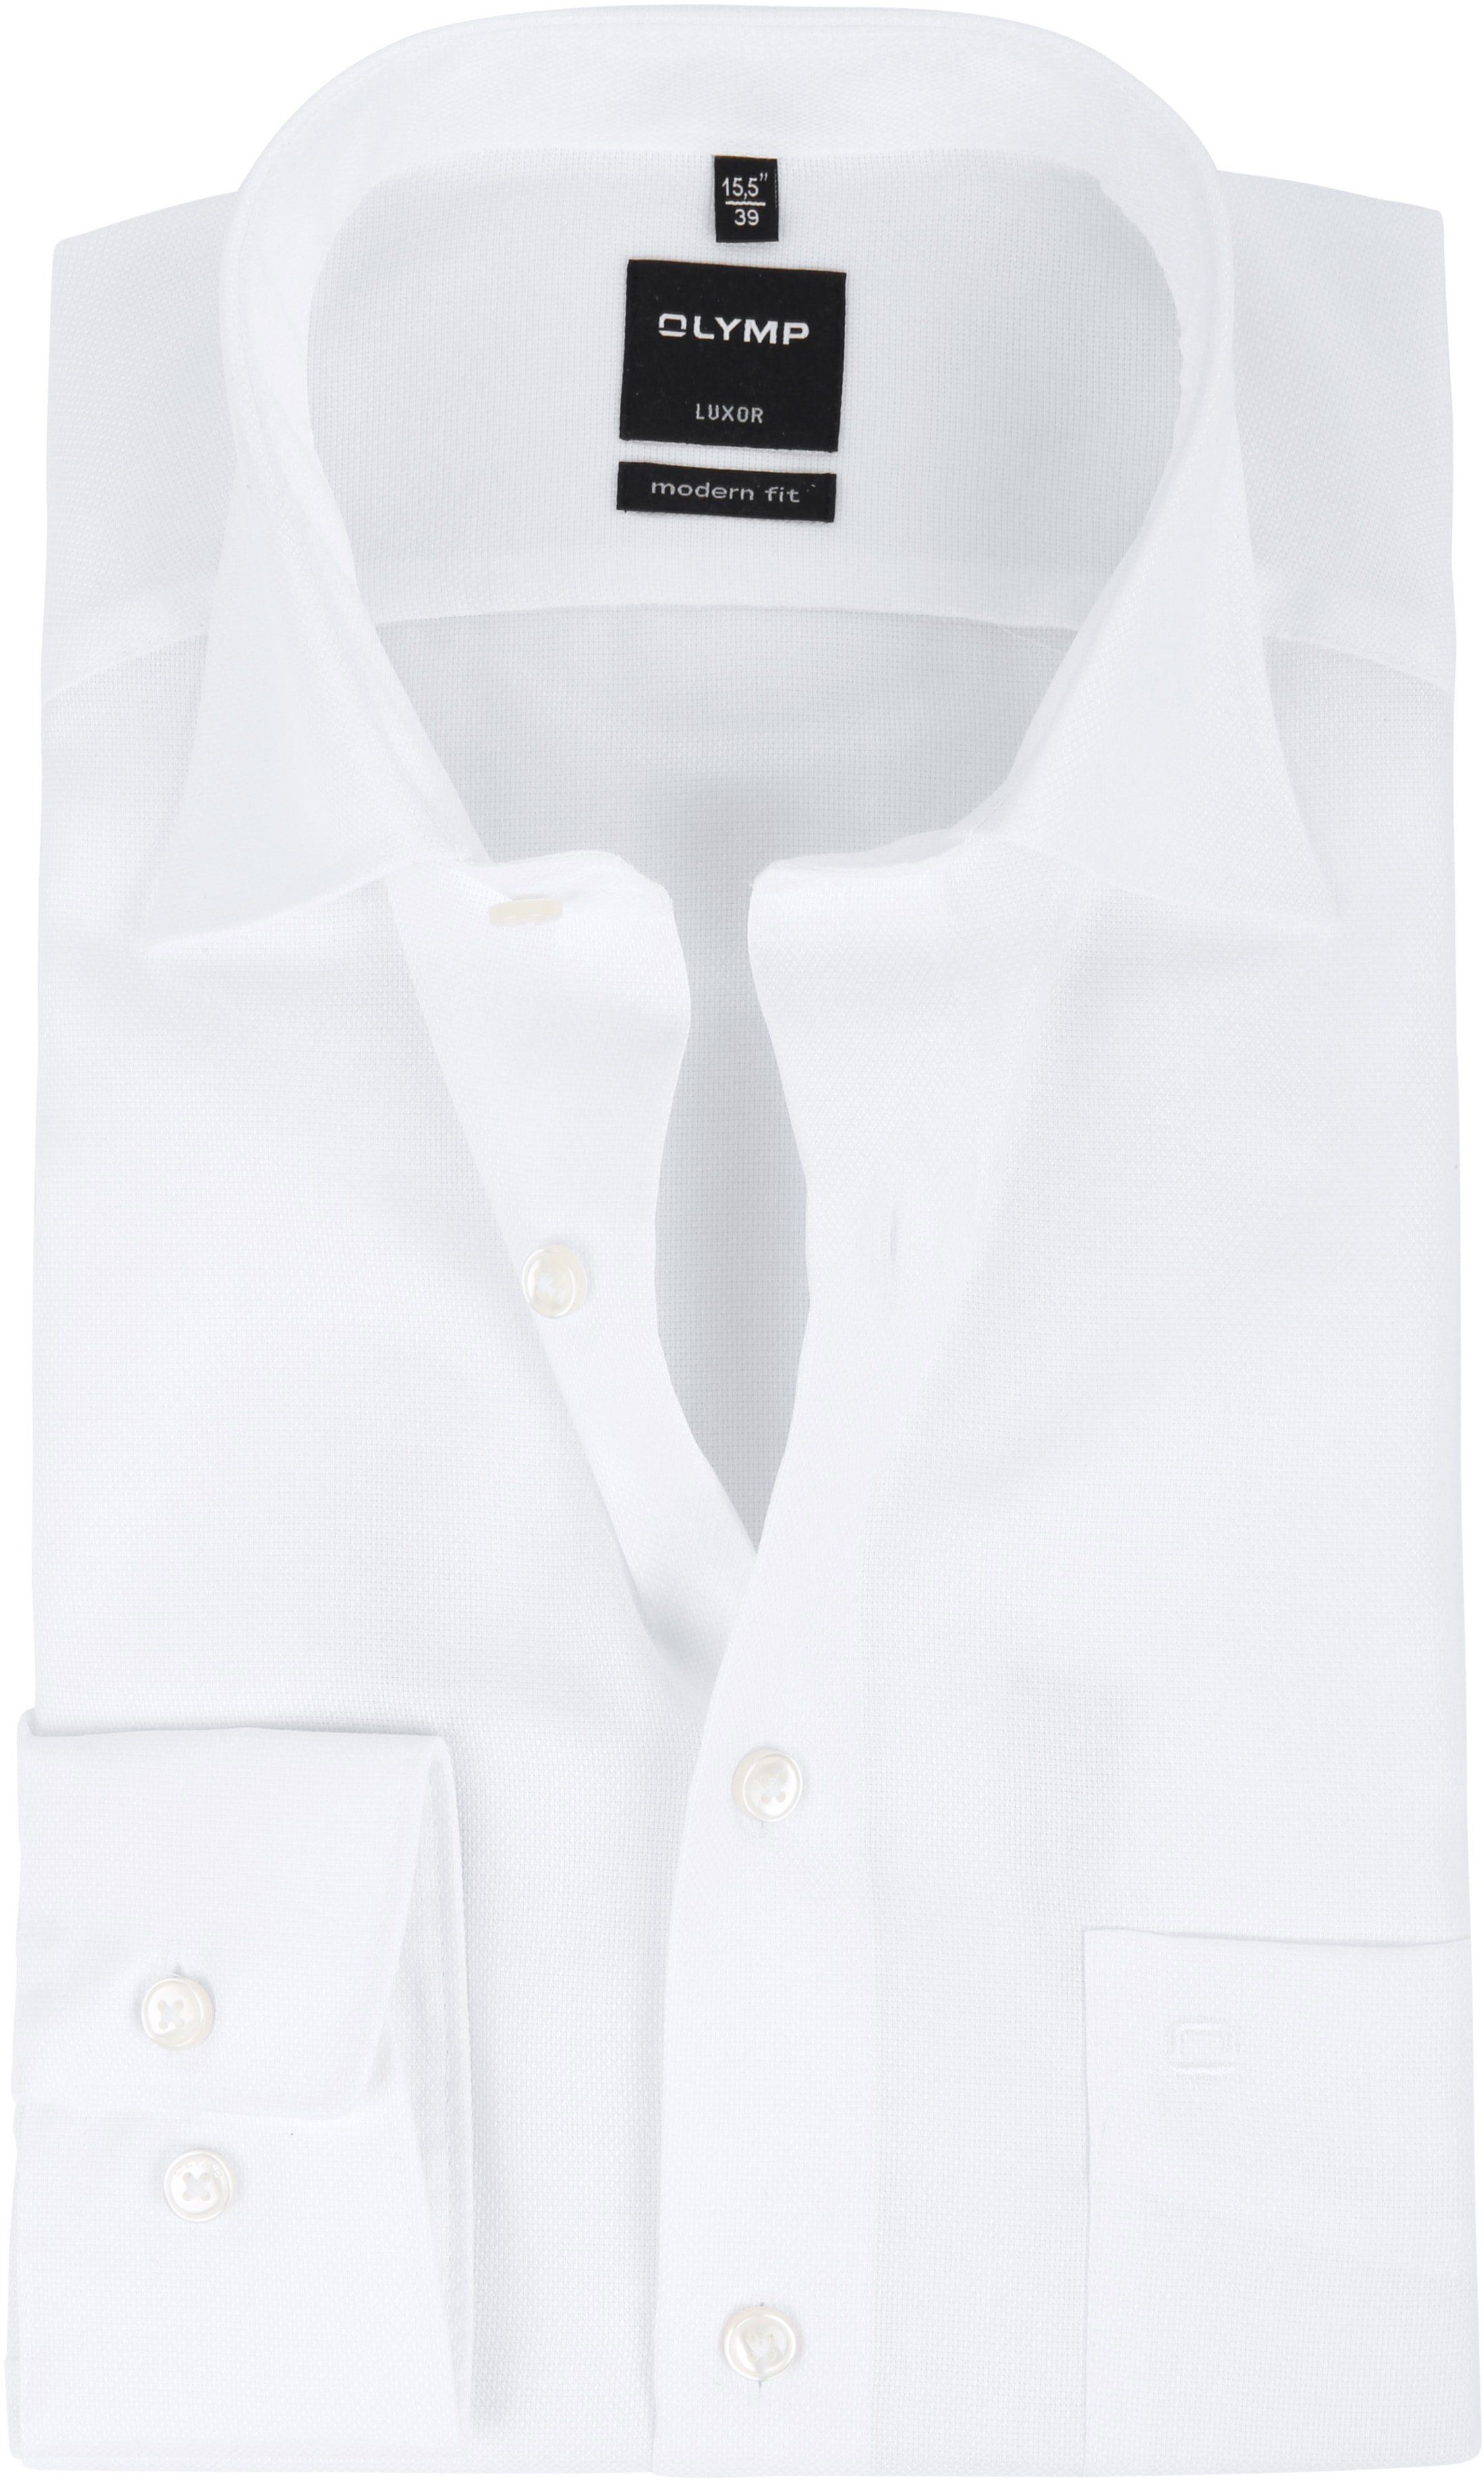 Olymp Luxor Shirt Modern Fit White size 47 product